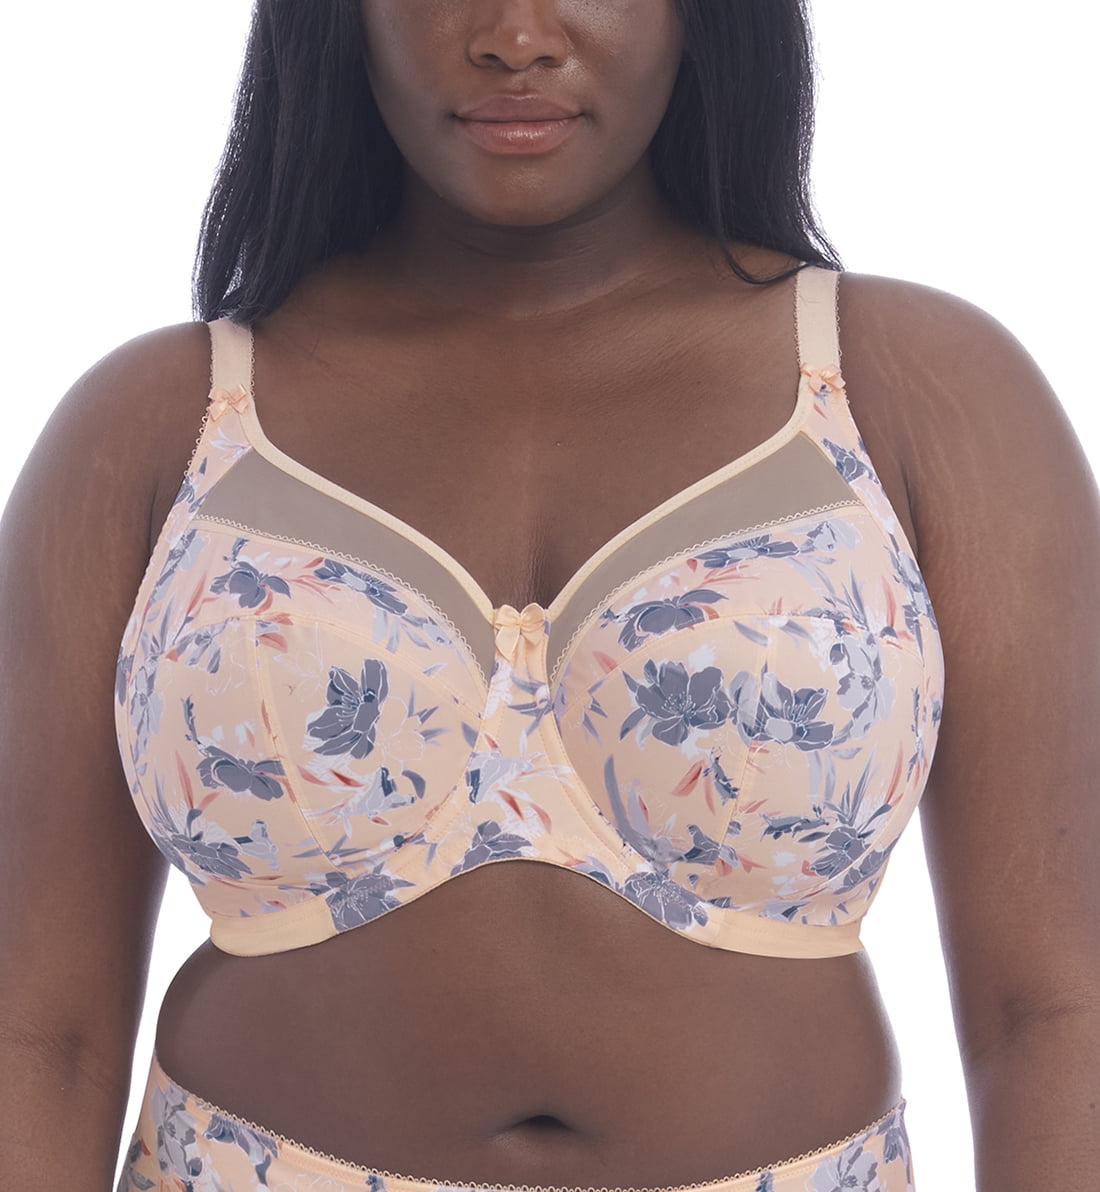 Underwire Full Coverage Bra Wide Straps Support Panels Plus Size 34 36 38  40 42 44 / C D E F G H I J (34J, Ivory)